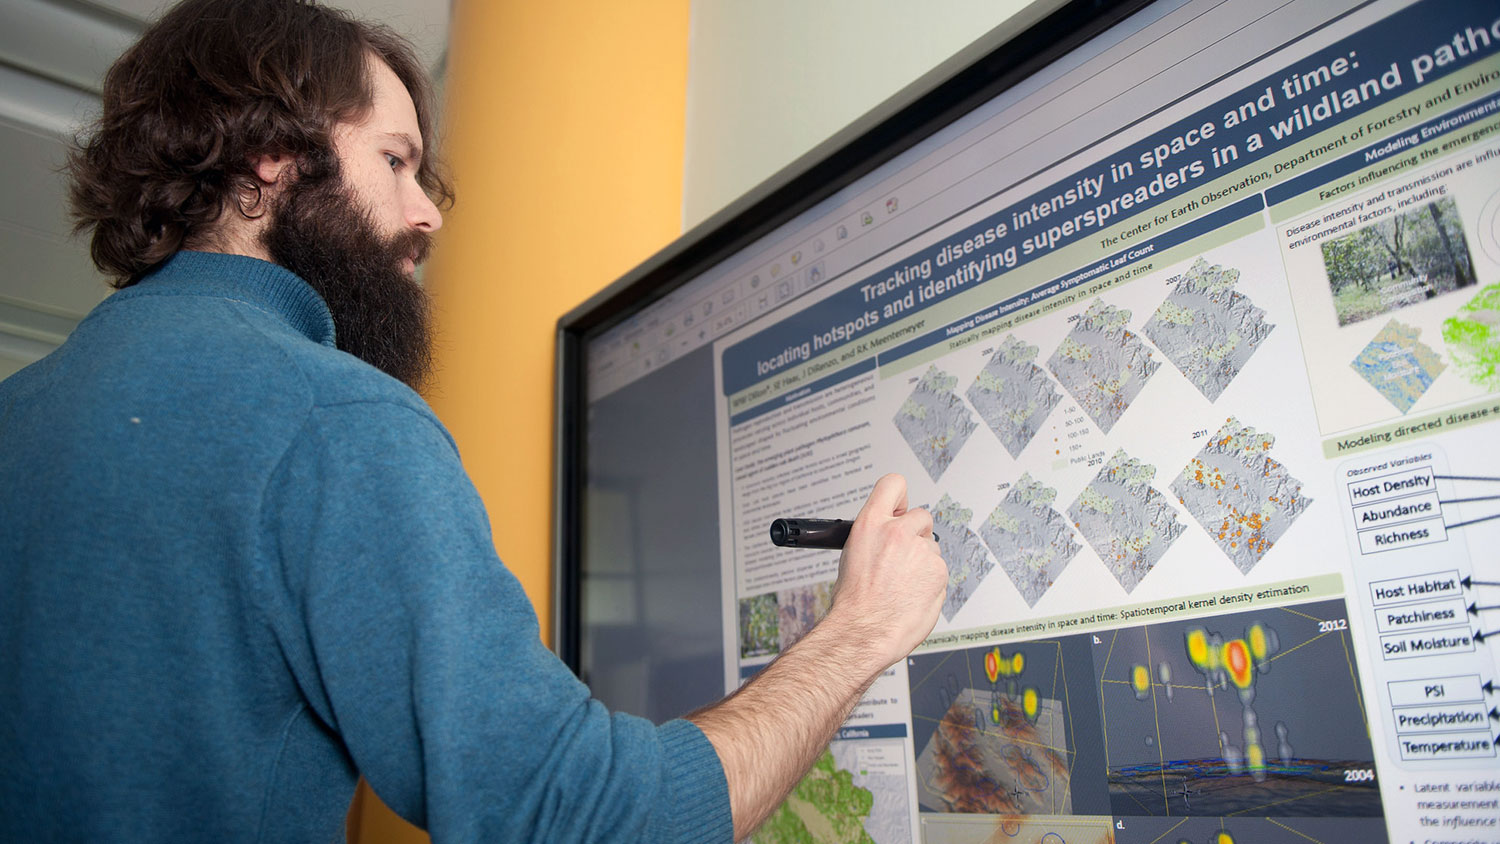 A student in the professional masters program using a touchscreen at the North Carolina State University Center for Geospatial Analytics